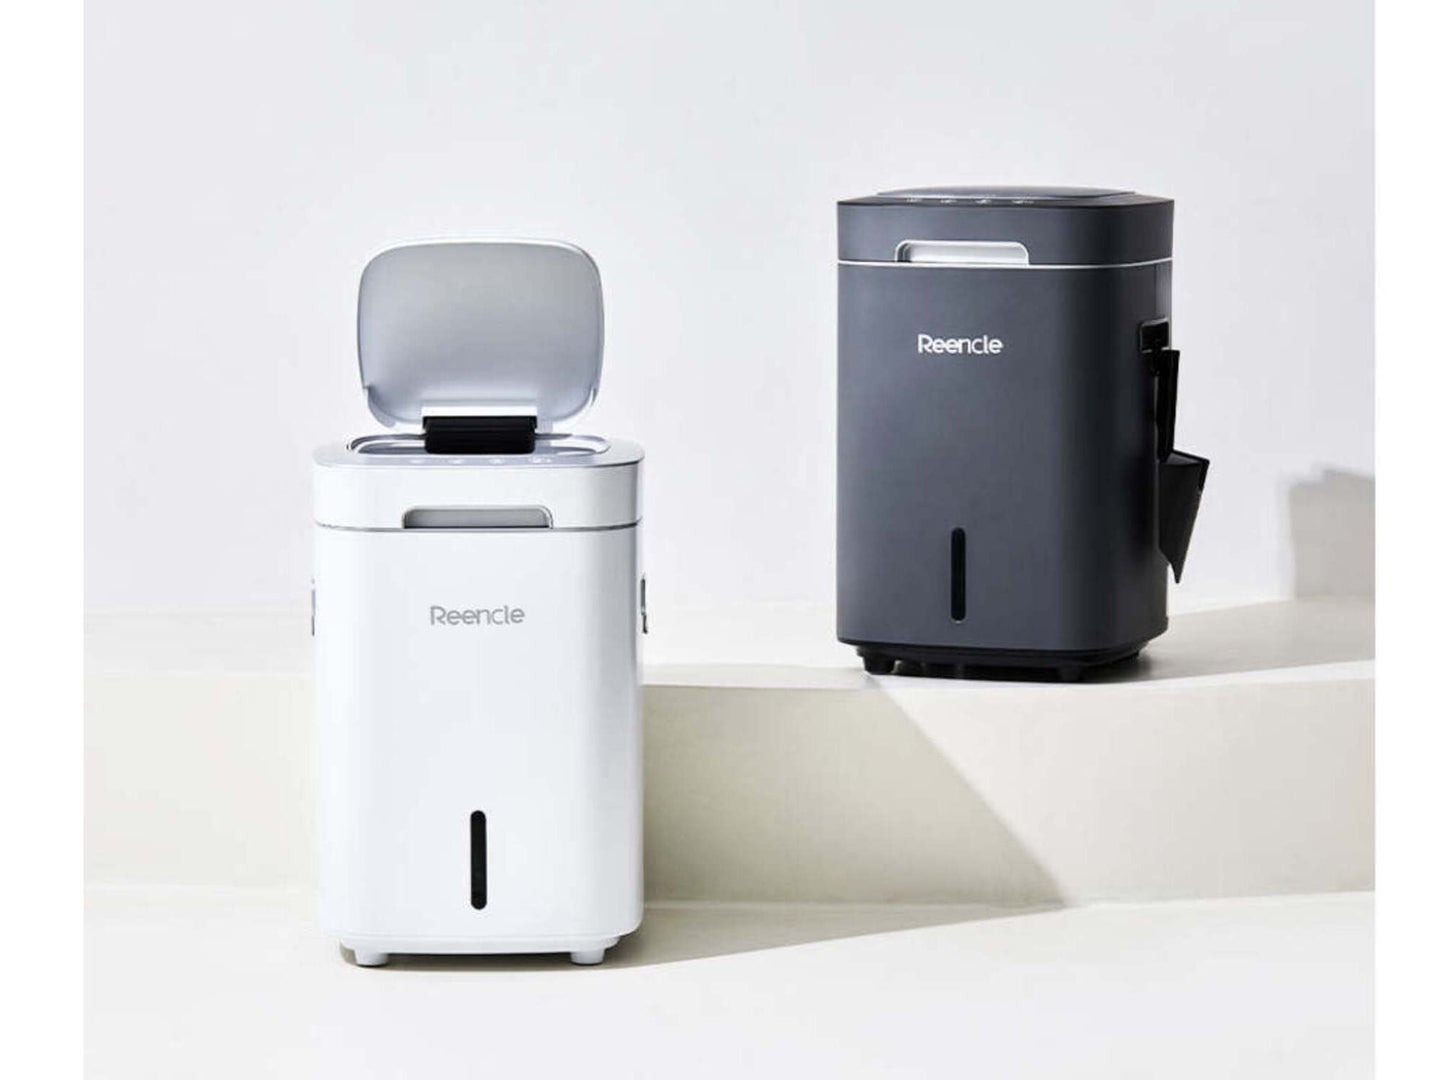 Two Reencle composters sitting on a white background